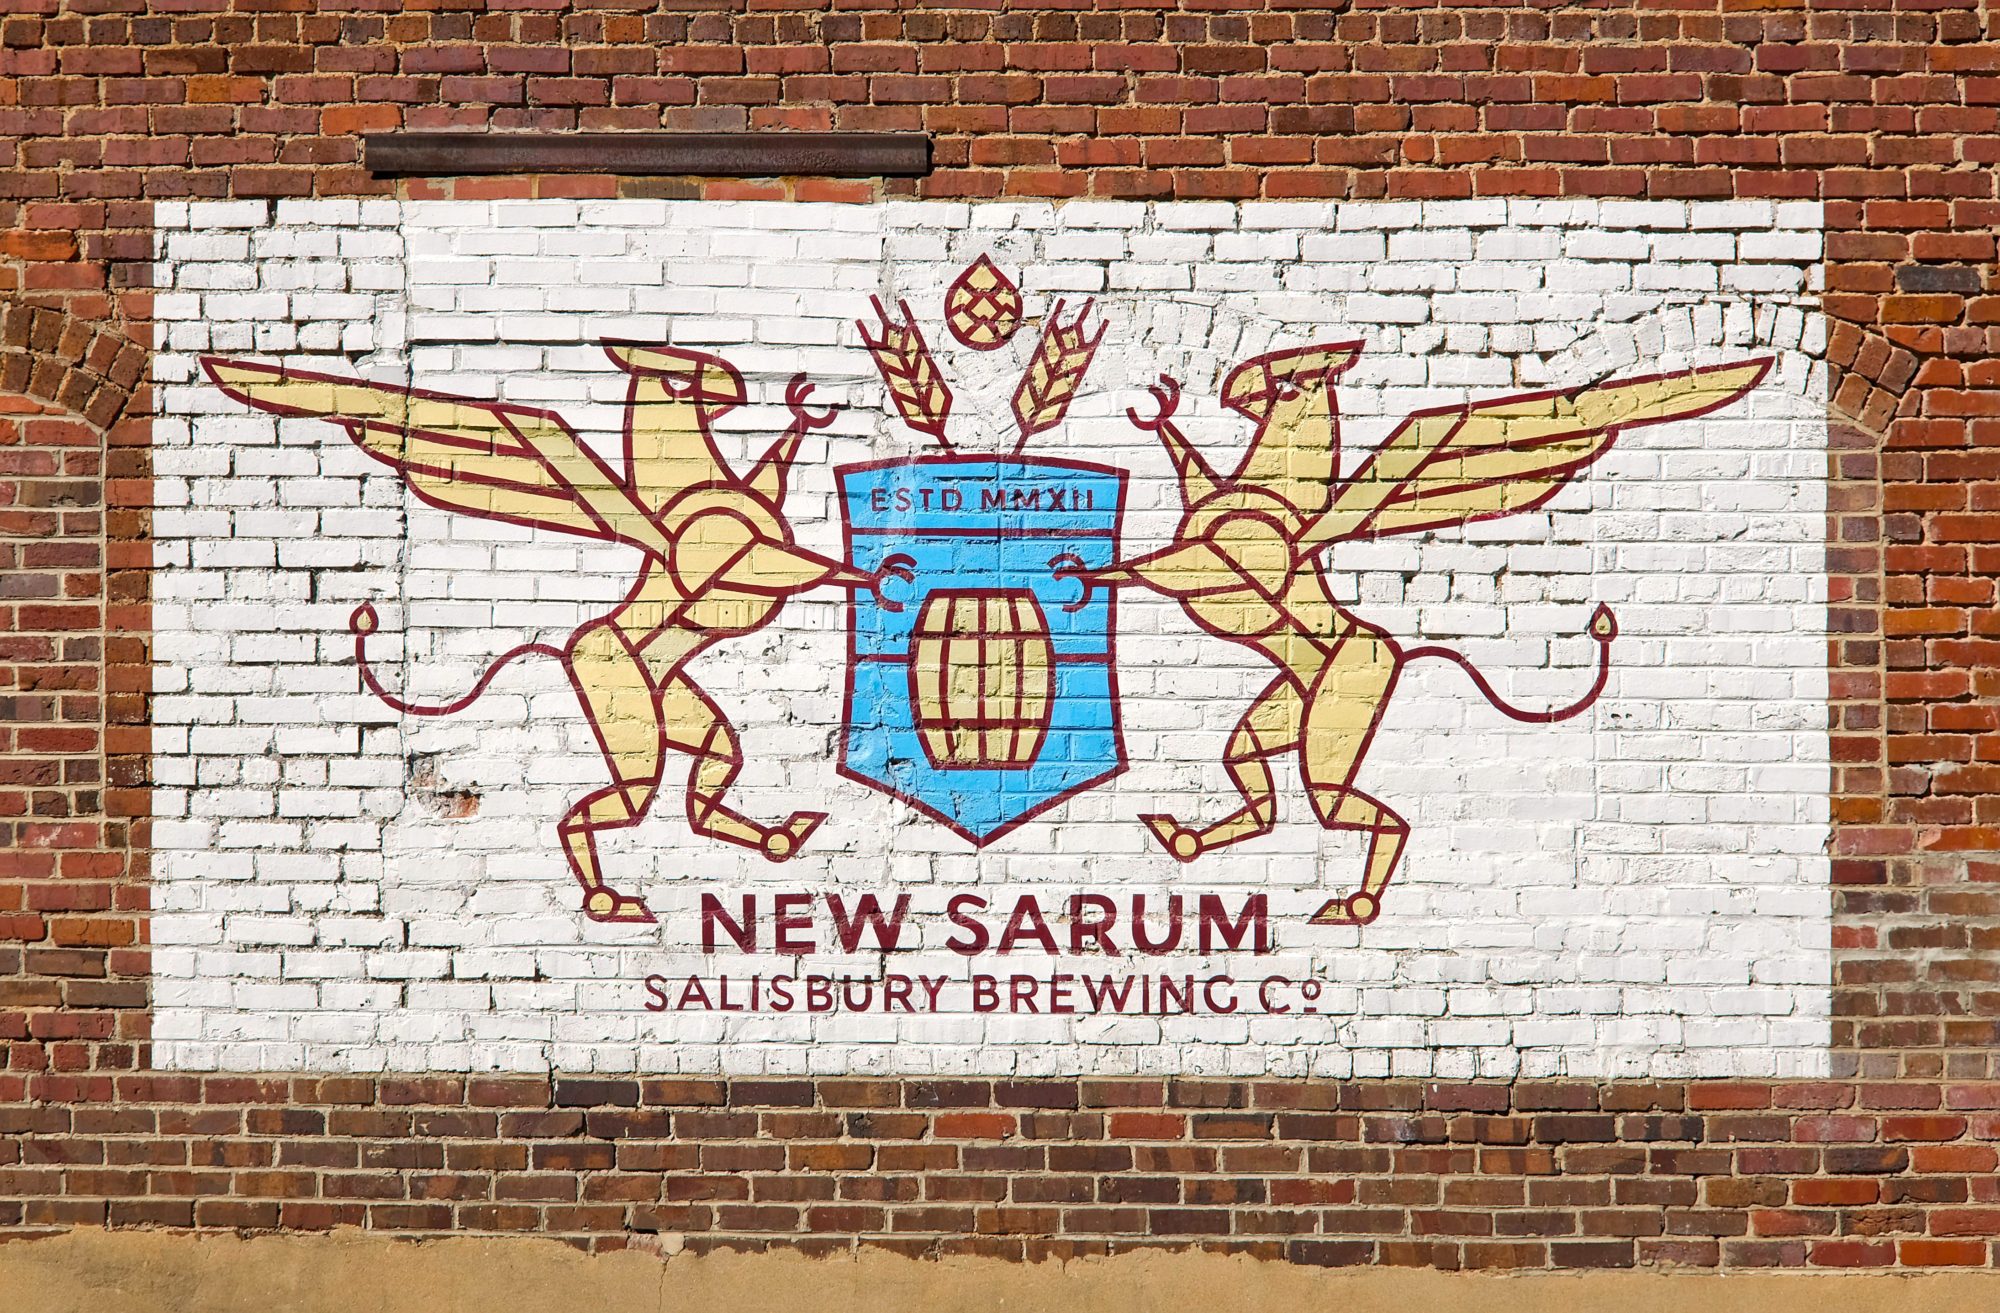 A mural that reads "New Sarum Salisbury Brewing"